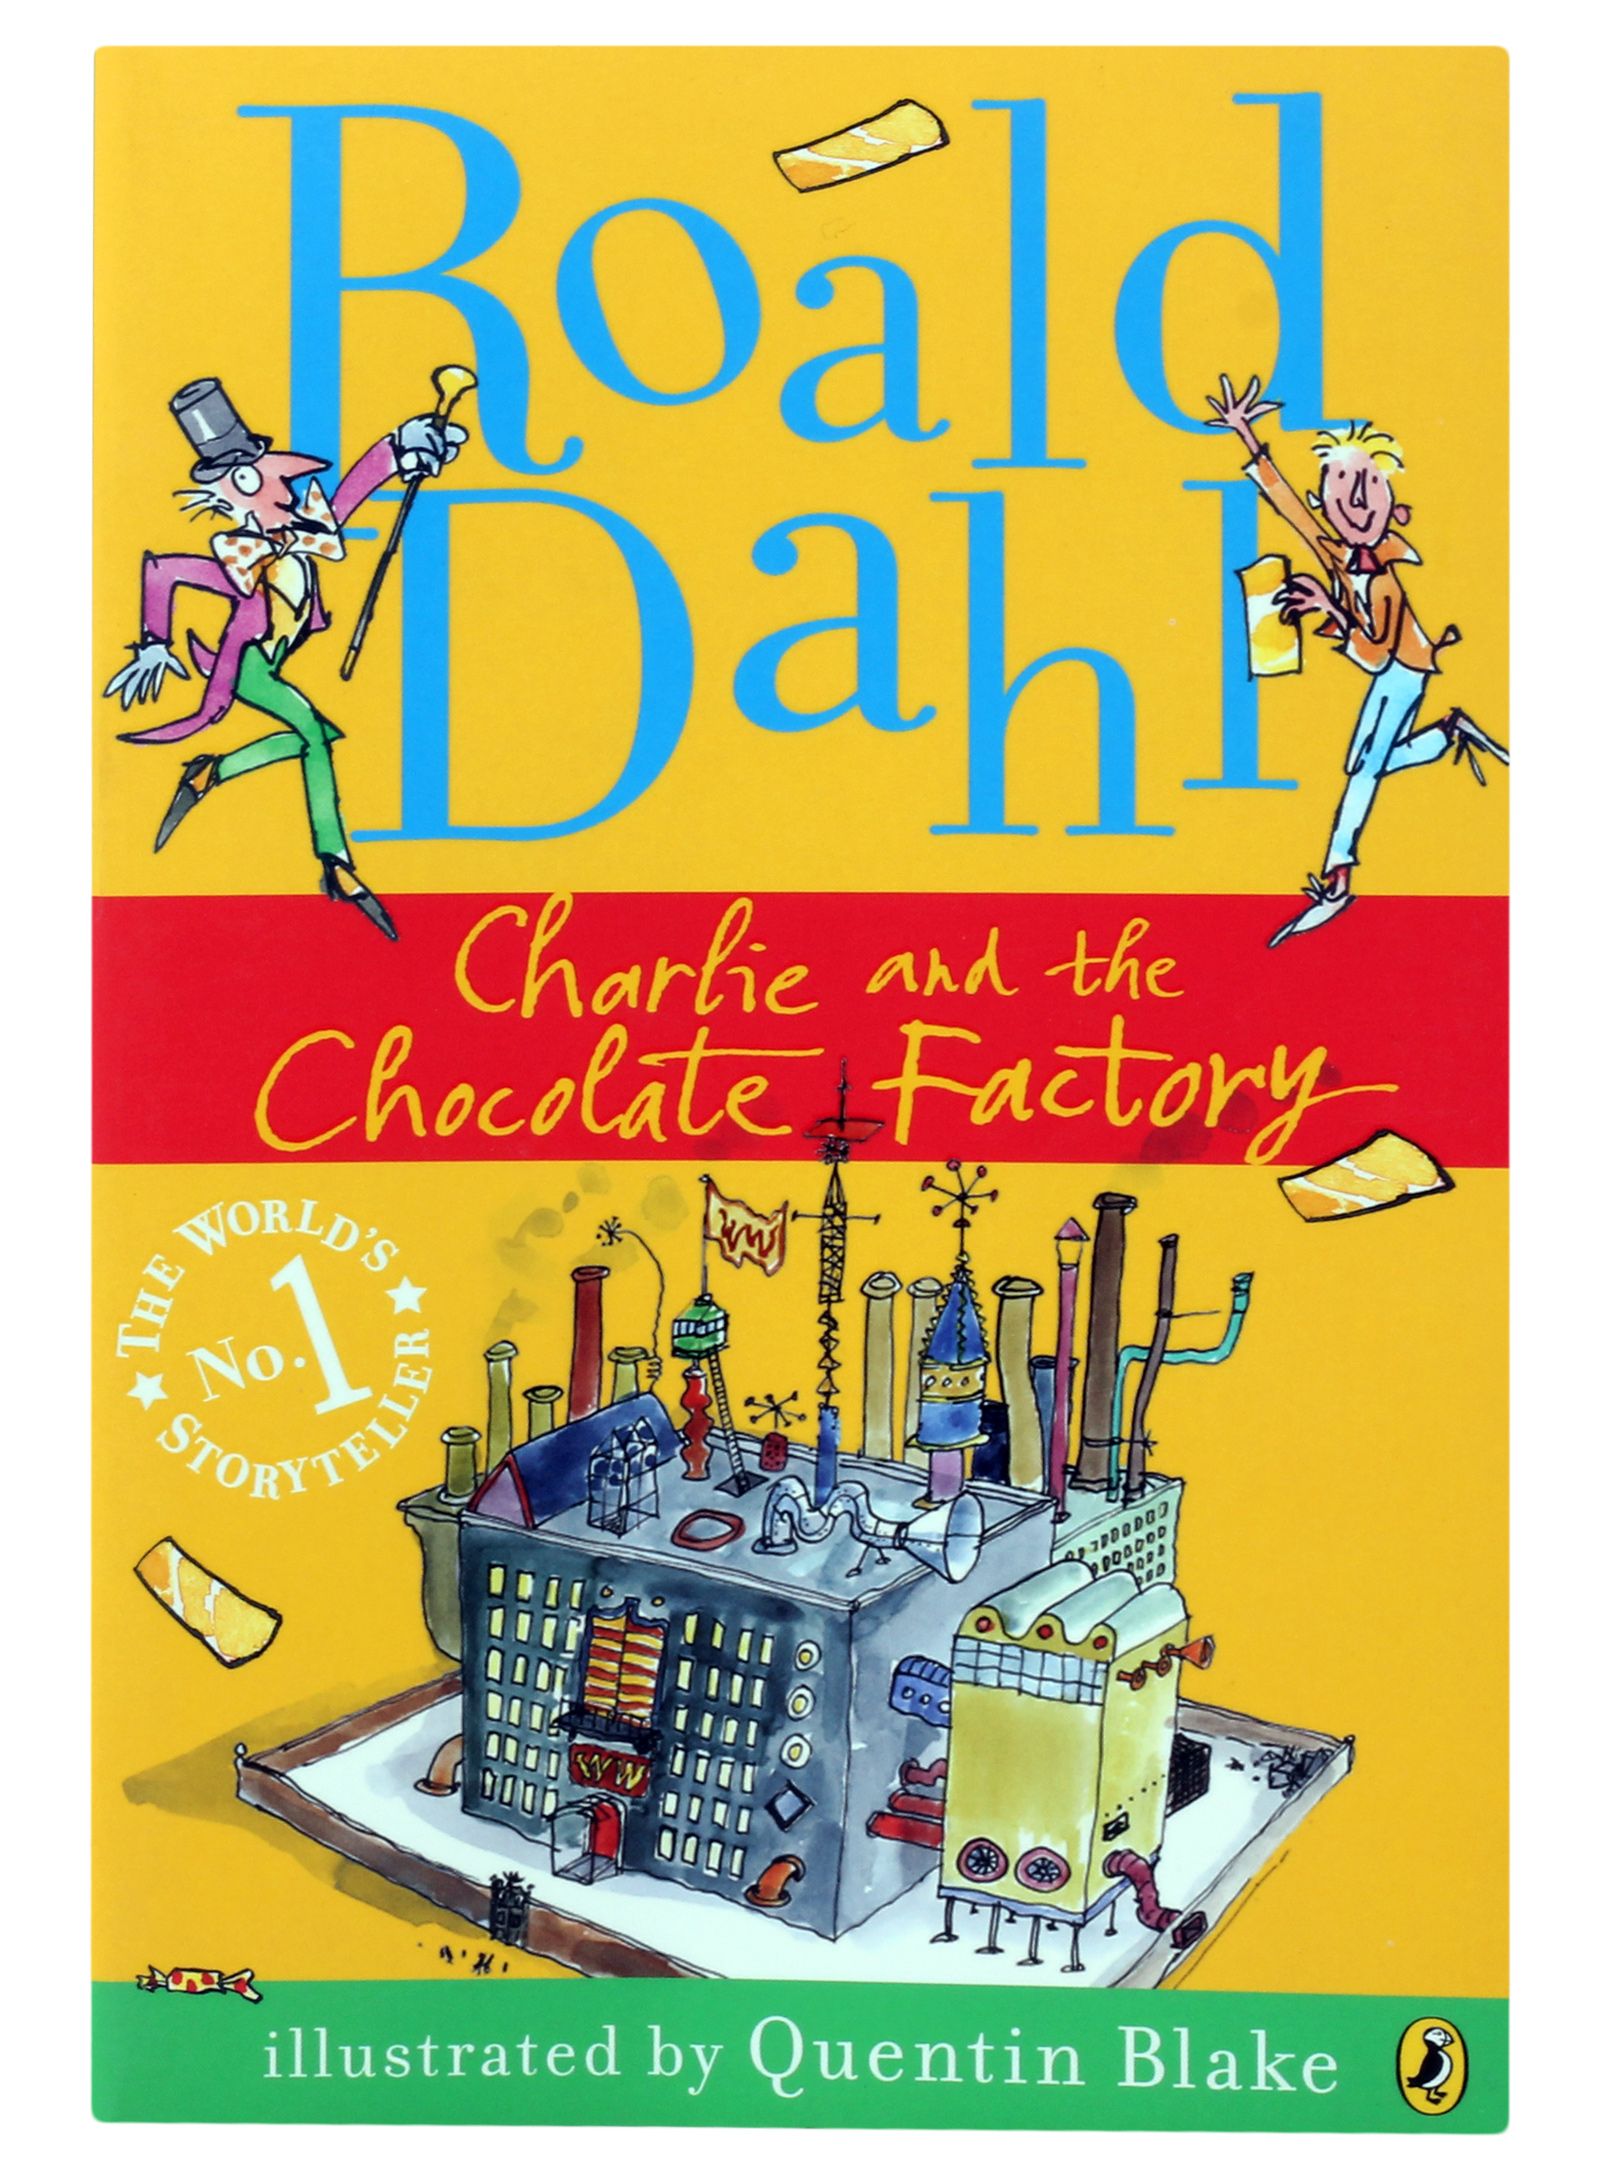 charlie and the chocolate factory book के लिए चित्र परिणाम